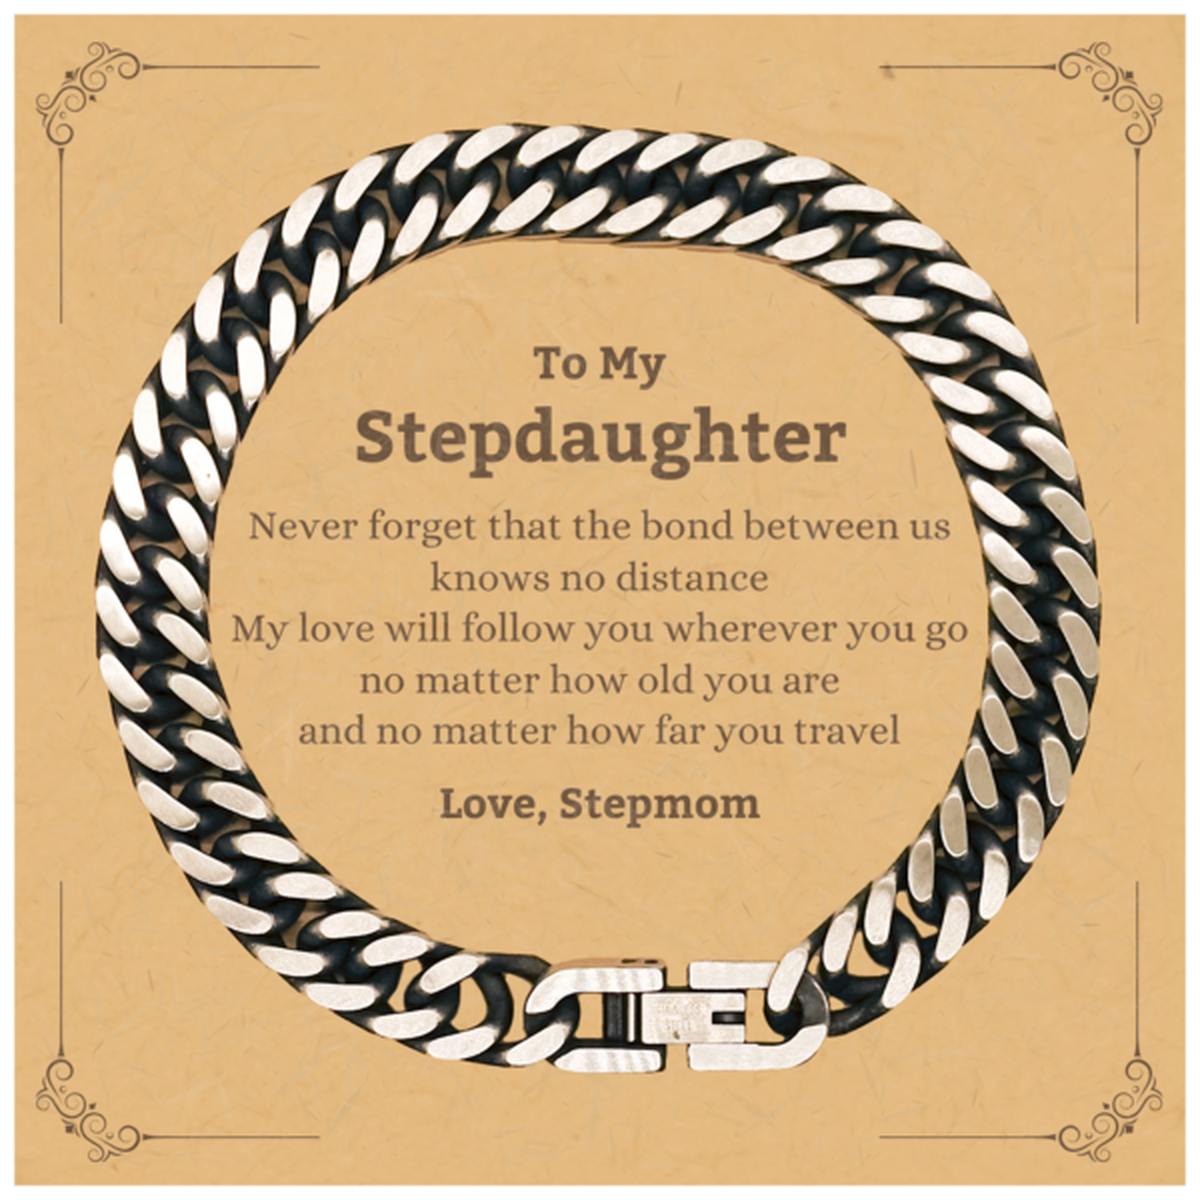 Stepdaughter Birthday Gifts from Stepmom, Adjustable Cuban Link Chain Bracelet for Stepdaughter Christmas Graduation Unique Gifts Stepdaughter Never forget that the bond between us knows no distance. Love, Stepmom